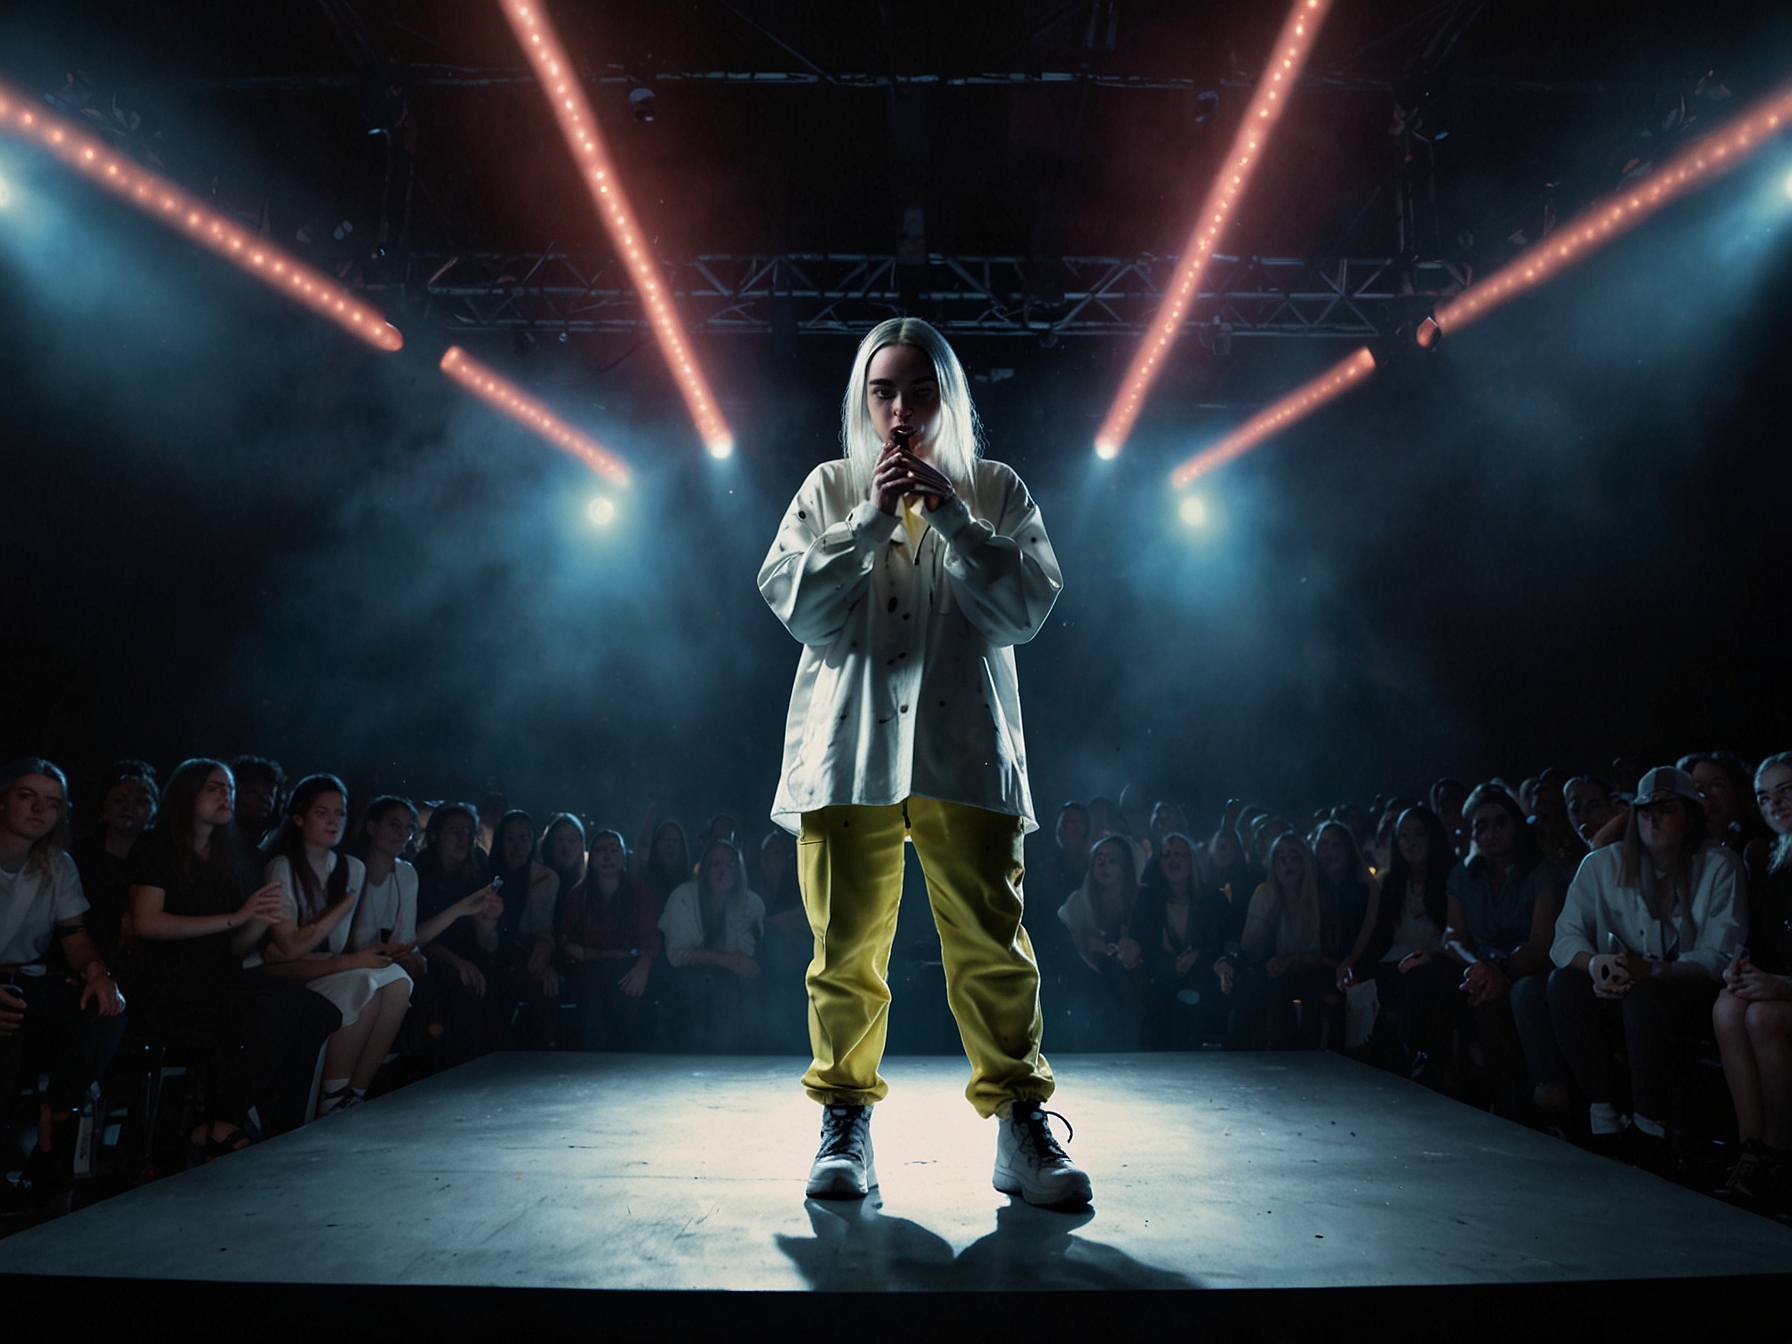 Billie Eilish performing on stage with vibrant lights, capturing her emotional and dynamic stage presence. This image reflects her dominance on the Australian albums chart with 'Hit Me Hard And Soft.'